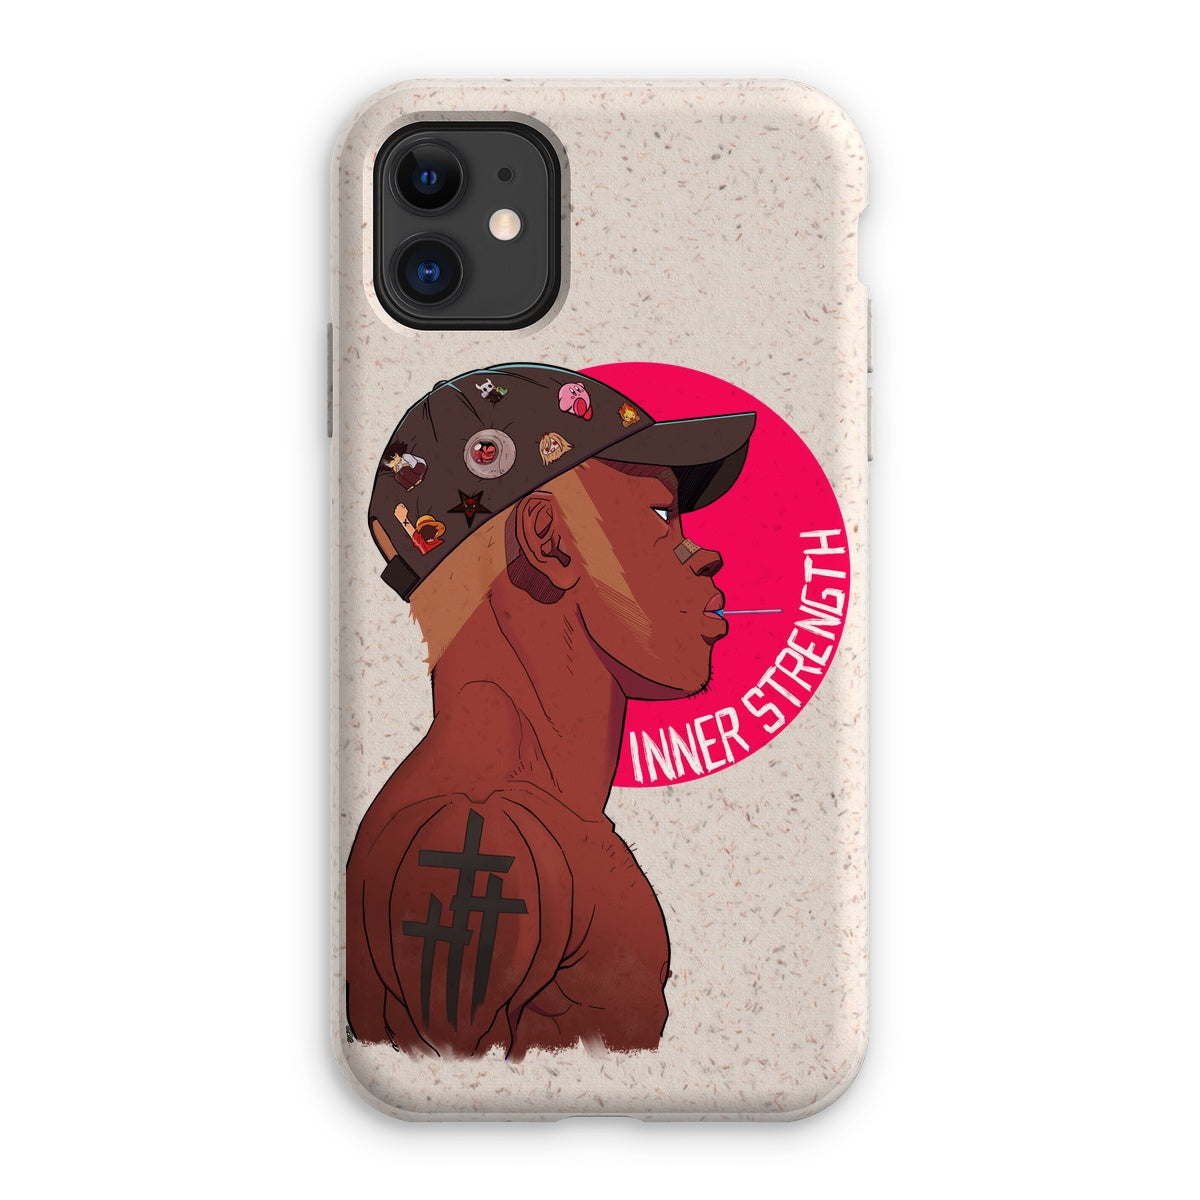 Unique and cool Gorillaz-style inner strength phone case illustration